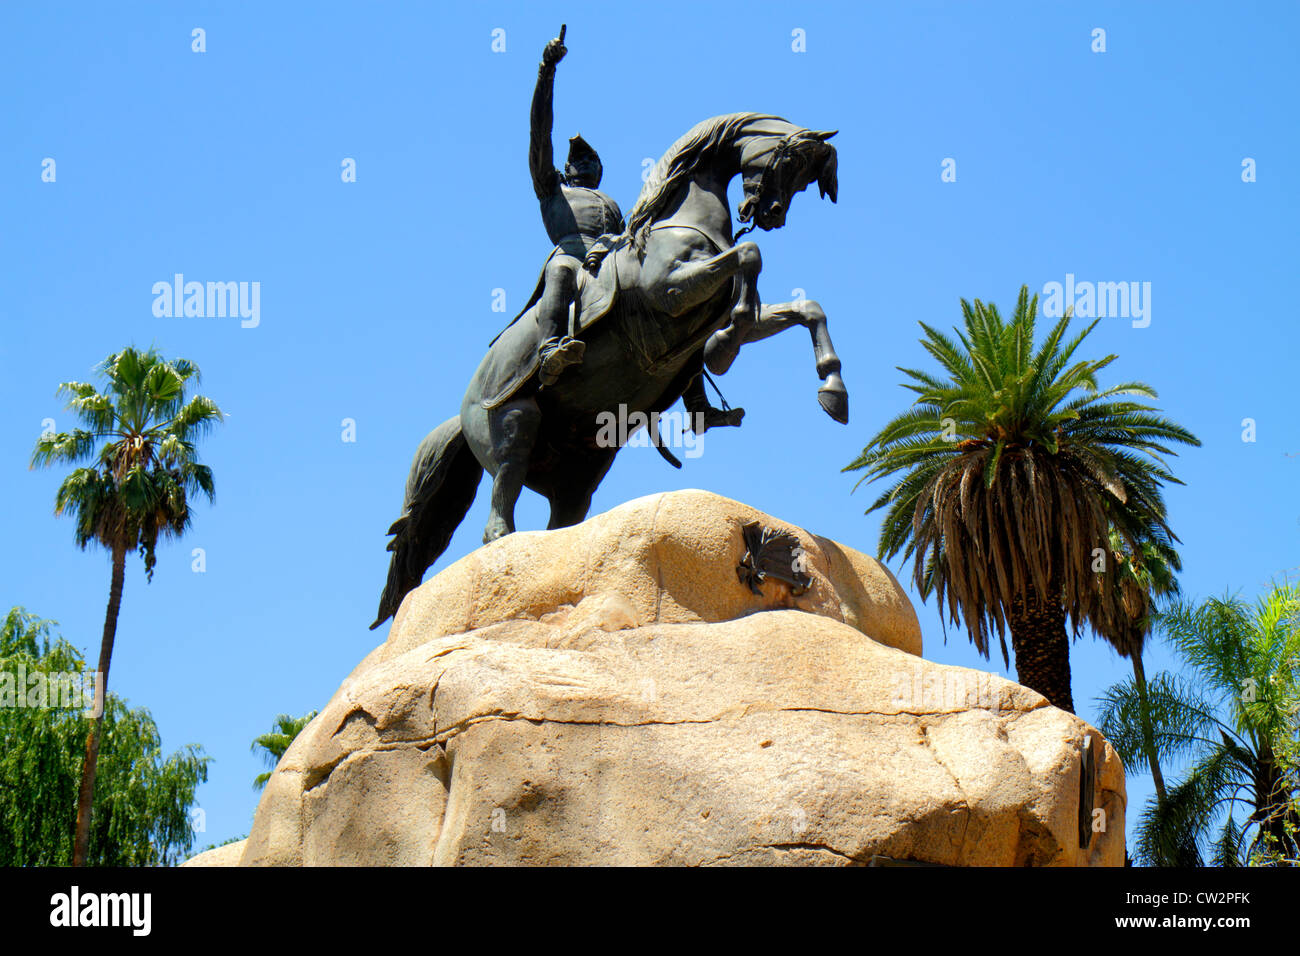 Mendoza Argentina,Plaza San Martin,equestrian statue,monument,independence war general,leader,honor,Army of the Andes,military commander,patriot,horse Stock Photo